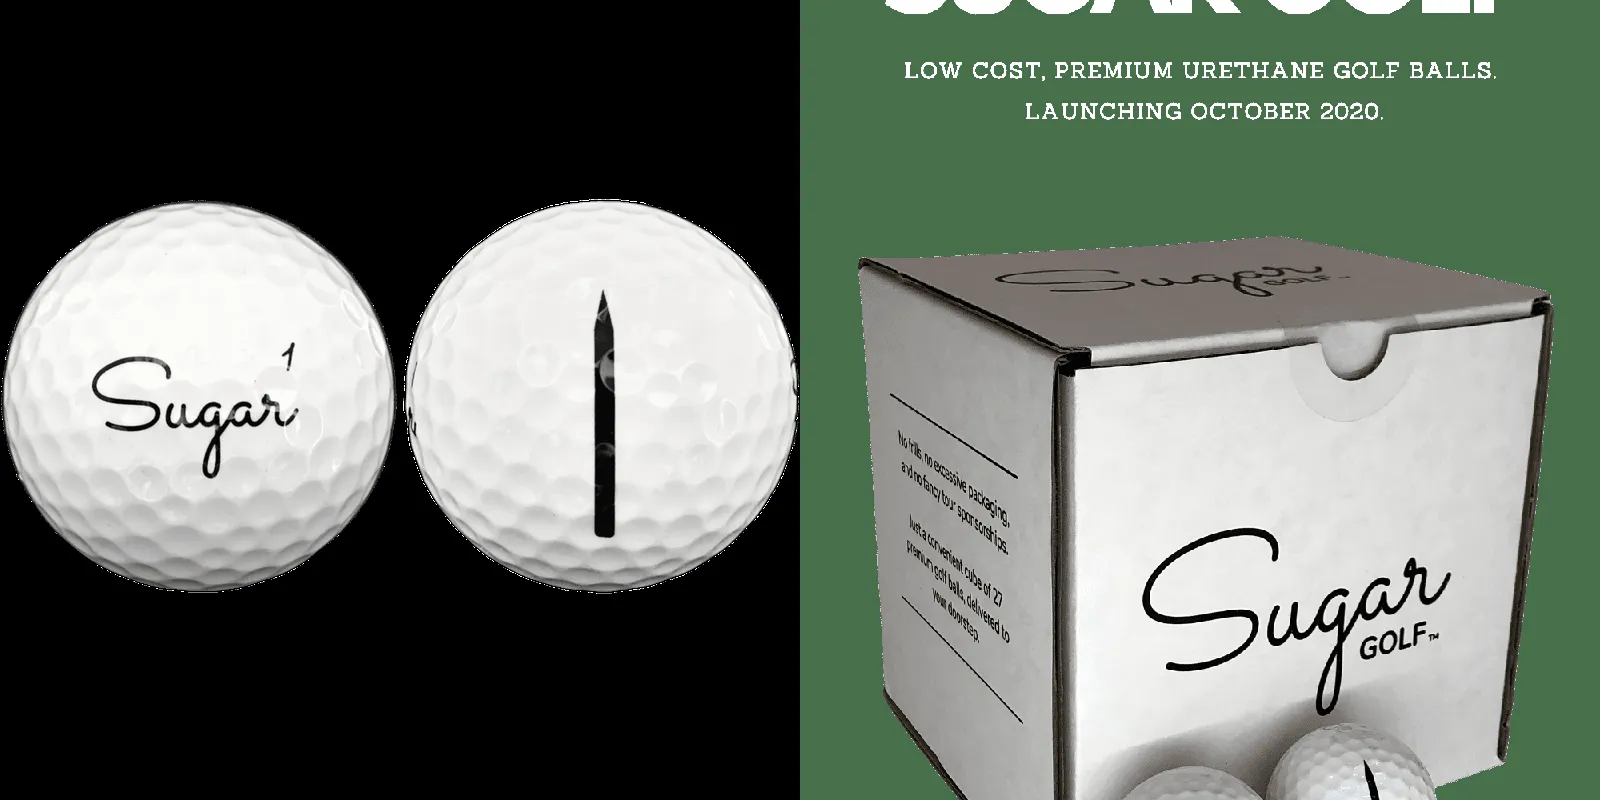 The introduction of Sugar Golf Ball